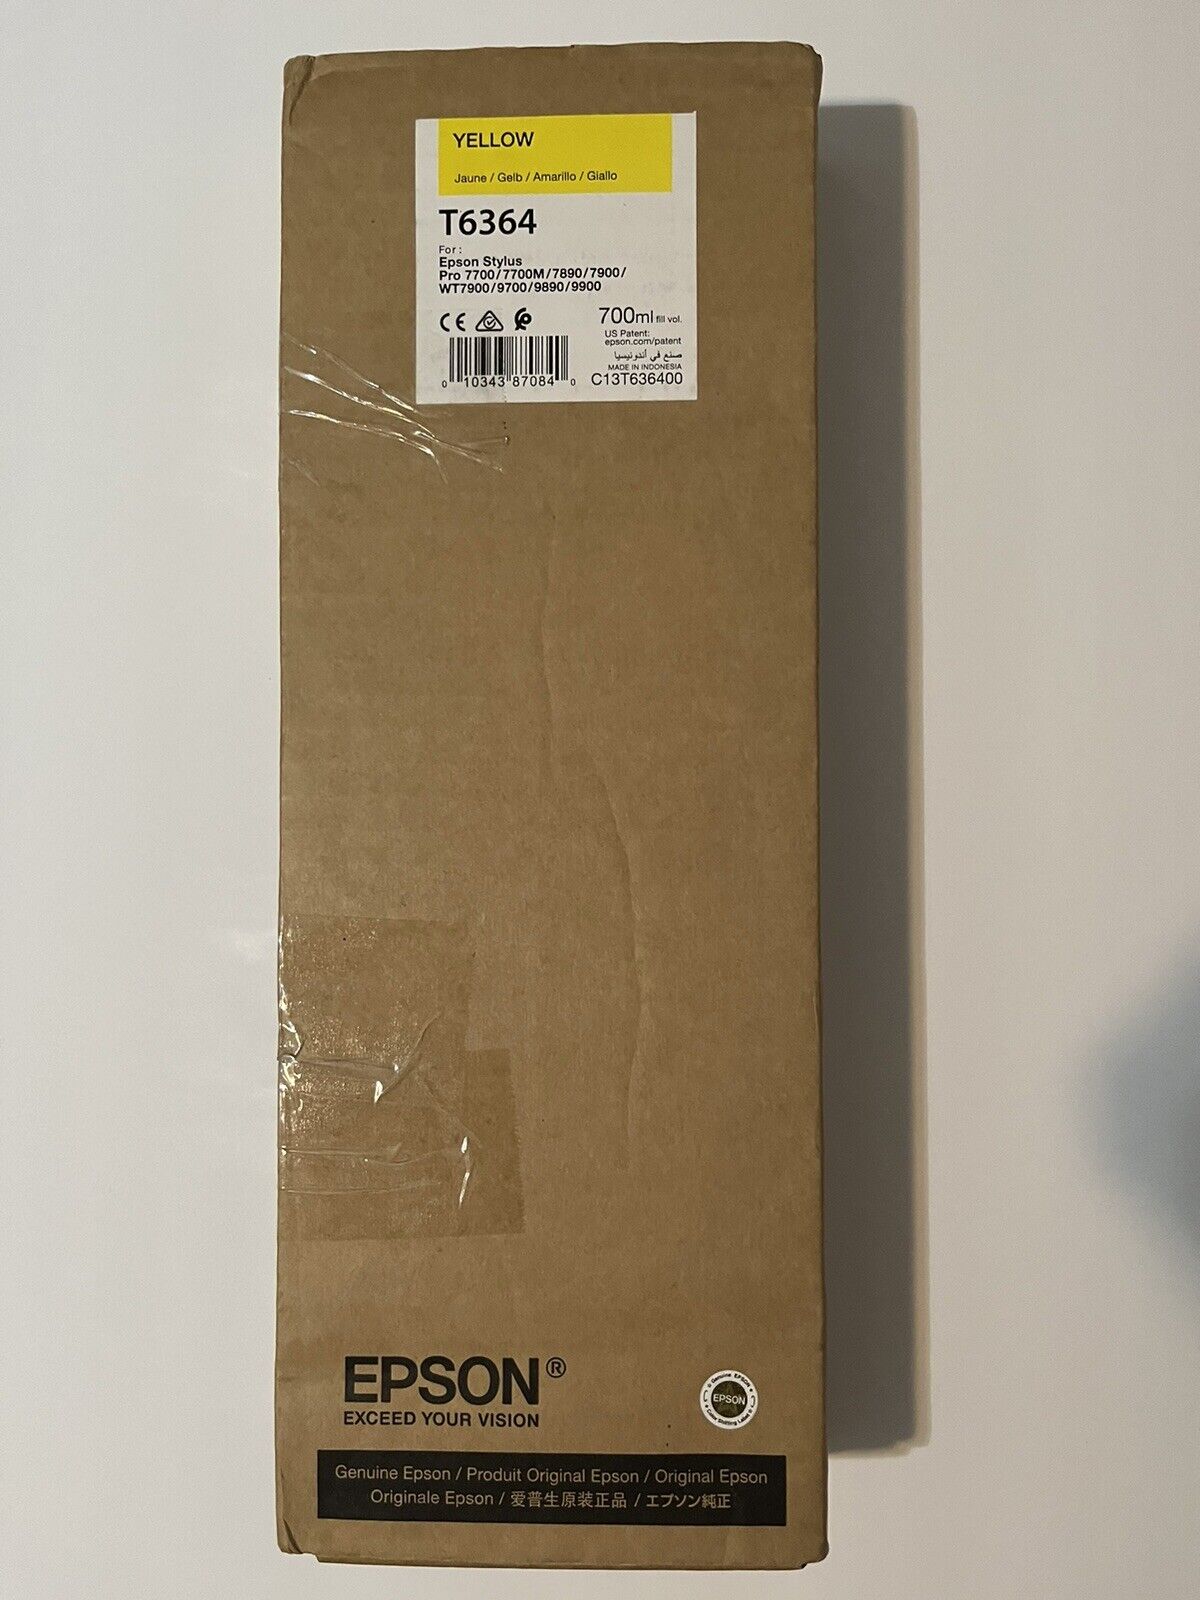 Sealed Epson T6364 Yellow 700ml Ink Cartridge EXP 2022 New